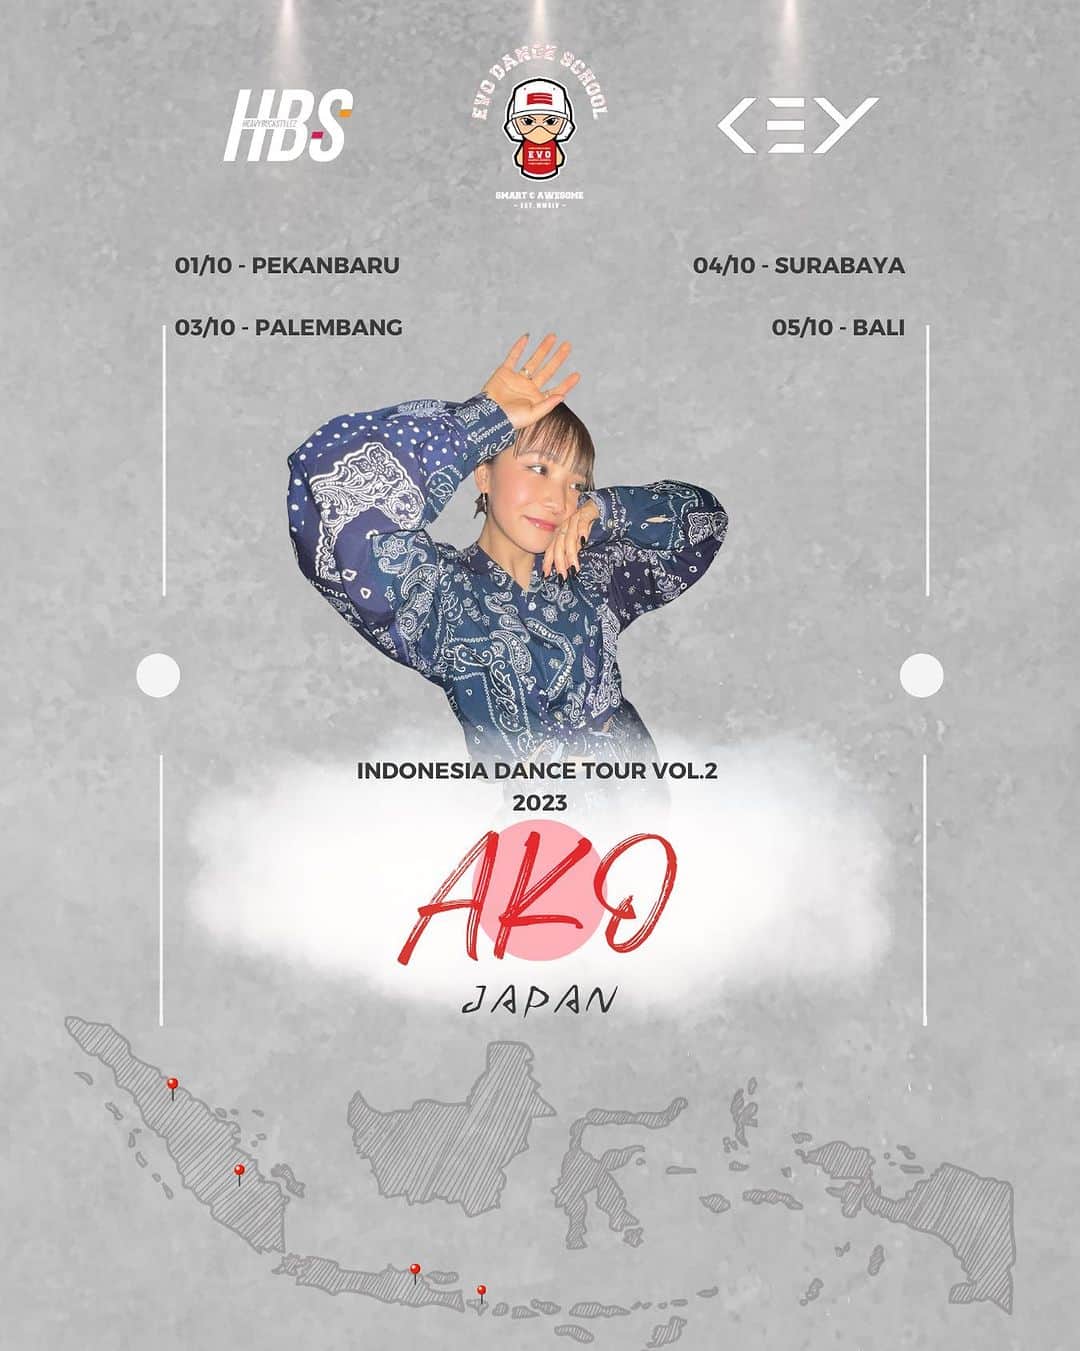 Akoのインスタグラム：「SEE YA SOON 🇮🇩  2023!! Indonesia Dance Tour Vol.2 by @akosun828 from JAPAN will be held on :  Pekanbaru - Oct, 1st 2023 host by @evodanceschool.pekanbaru  Palembang - Oct, 3rd 2023 host by @evodanceschool  Surabaya - Oct, 4th 2023 host by @heavybuckstylez  Bali - Oct, 5th 2023 host by @thekeycreativespace  If you wanna join the class, you can contact the host in every city.  Arigatou!!  #Indonasia #Japan  #evodanceschool #heavybuckstylez #thekeycreativespace」